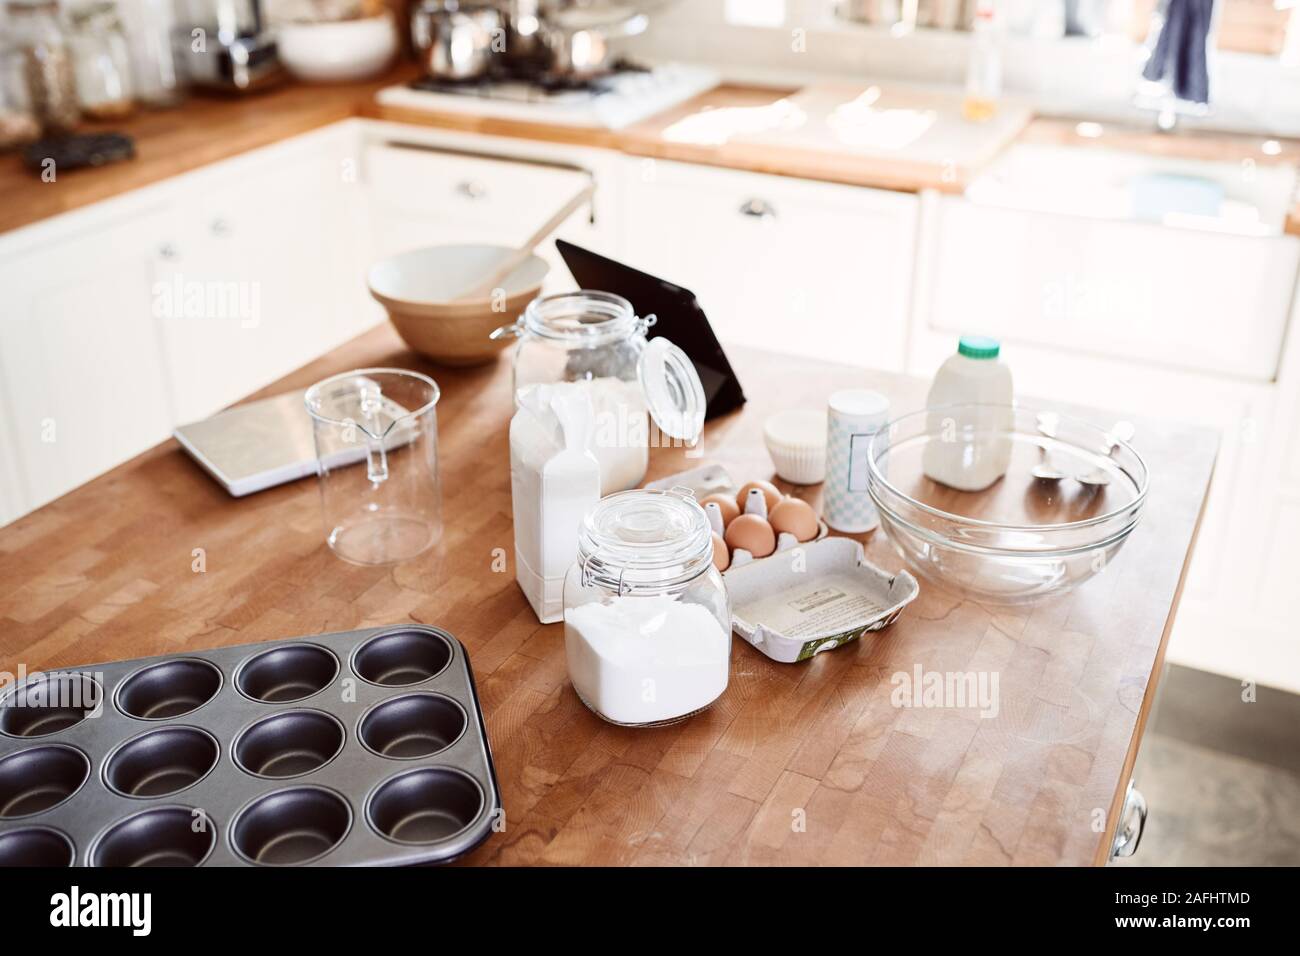 Ingredients And Baking Utensils Laid Out On Work Surface In Kitchen Stock Photo